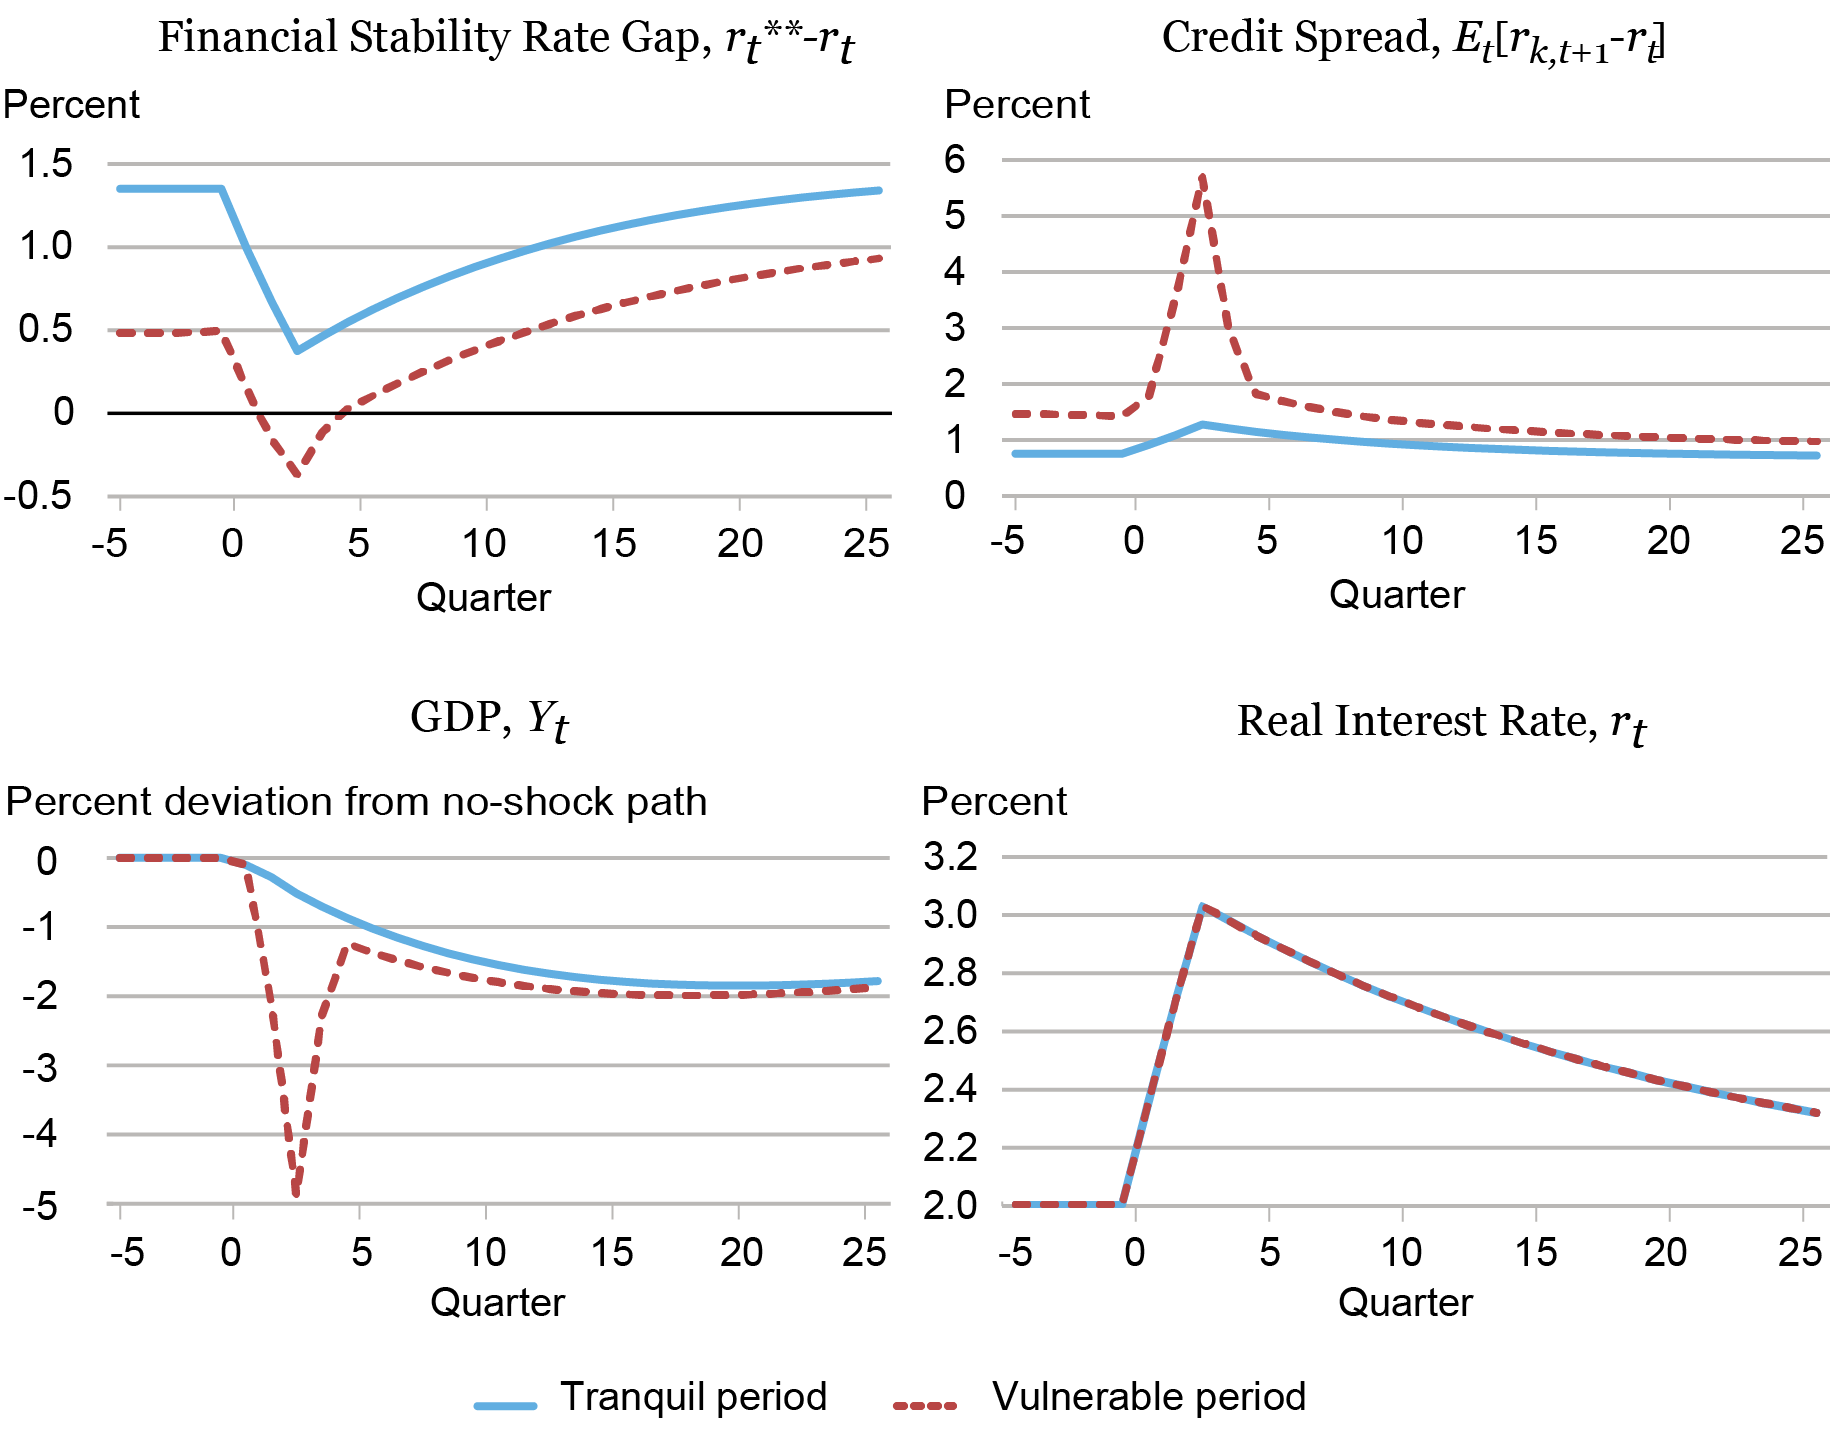 A four-panel Liberty Street Economics chart showing the response of credit spreads (top right panel) and GDP (bottom left panel) to a one percentage point increase in real interest rates (bottom right panel) during financially vulnerable and non-vulnerable periods. The top left panel shows the change in the financial stability interest rate gap, r**.